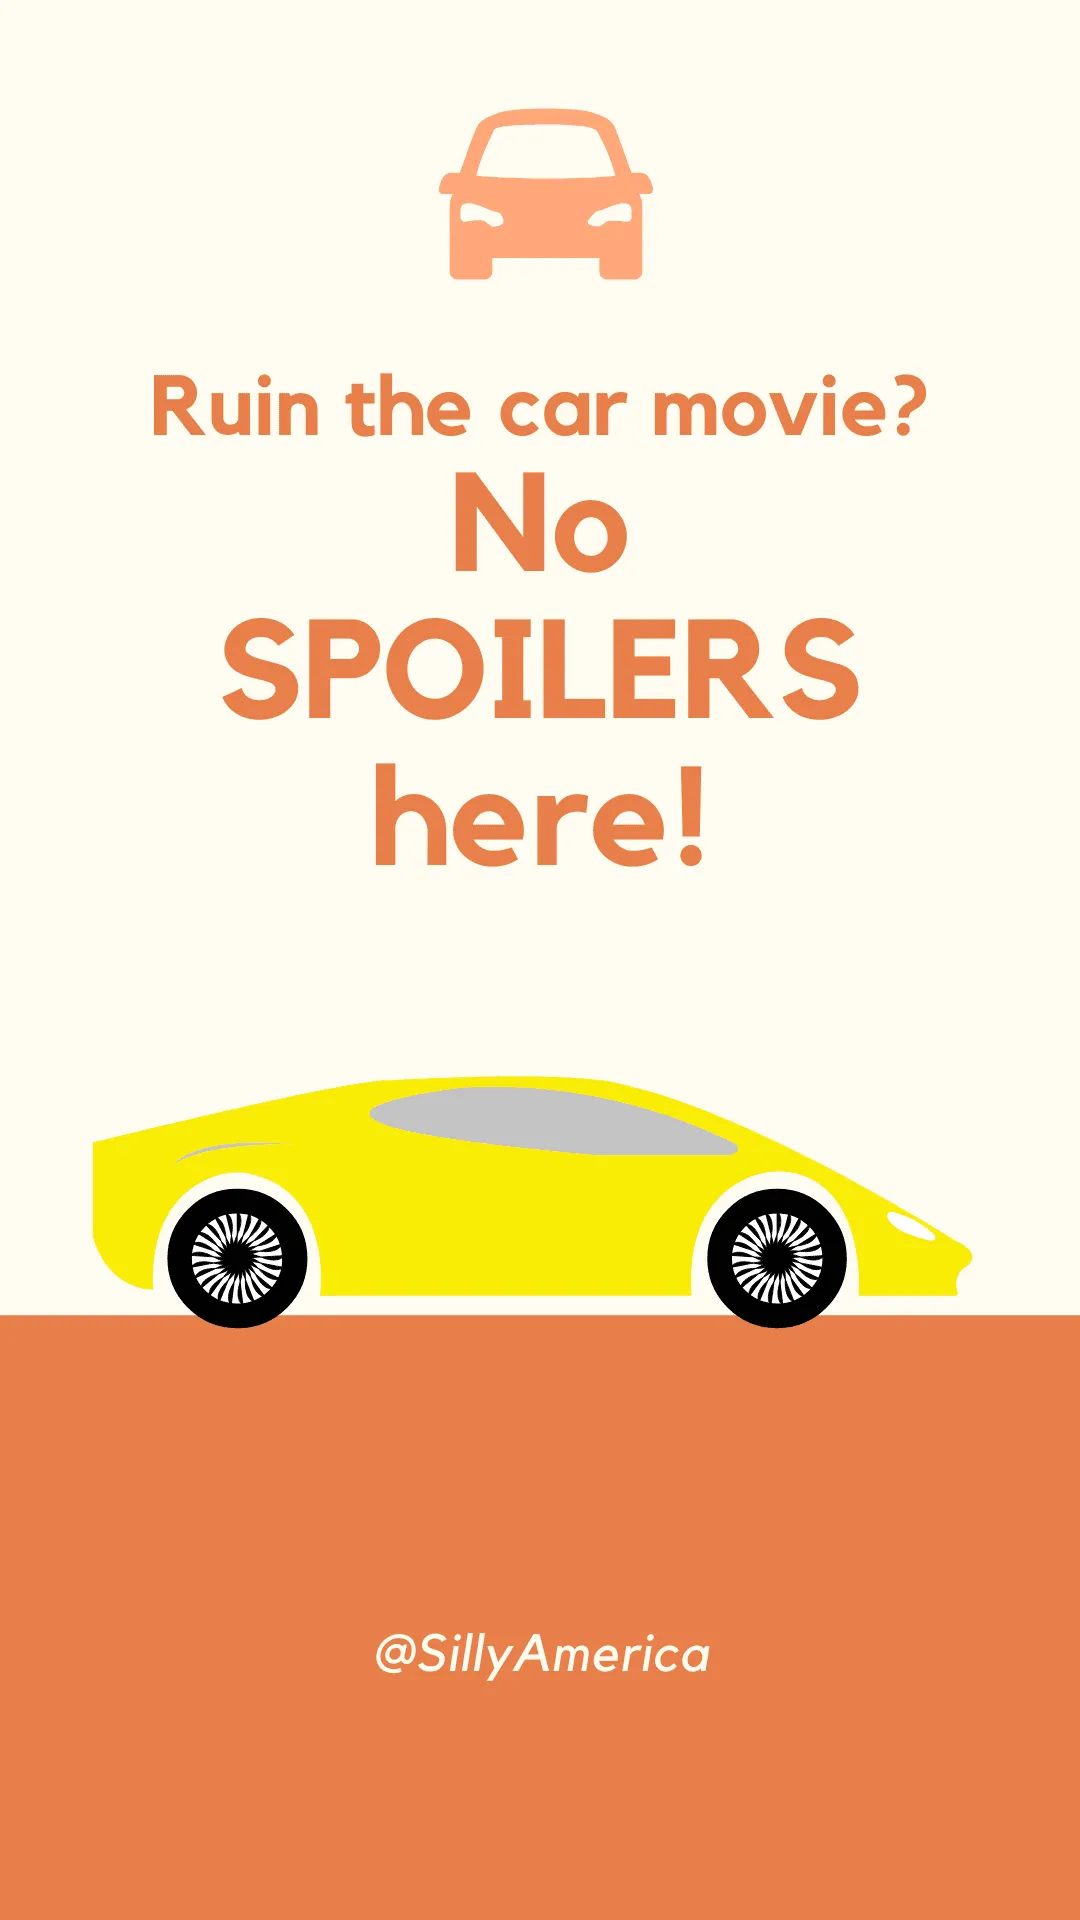 Ruin the car movie? No SPOILERS here! - Car Puns to fuel your road trip content!